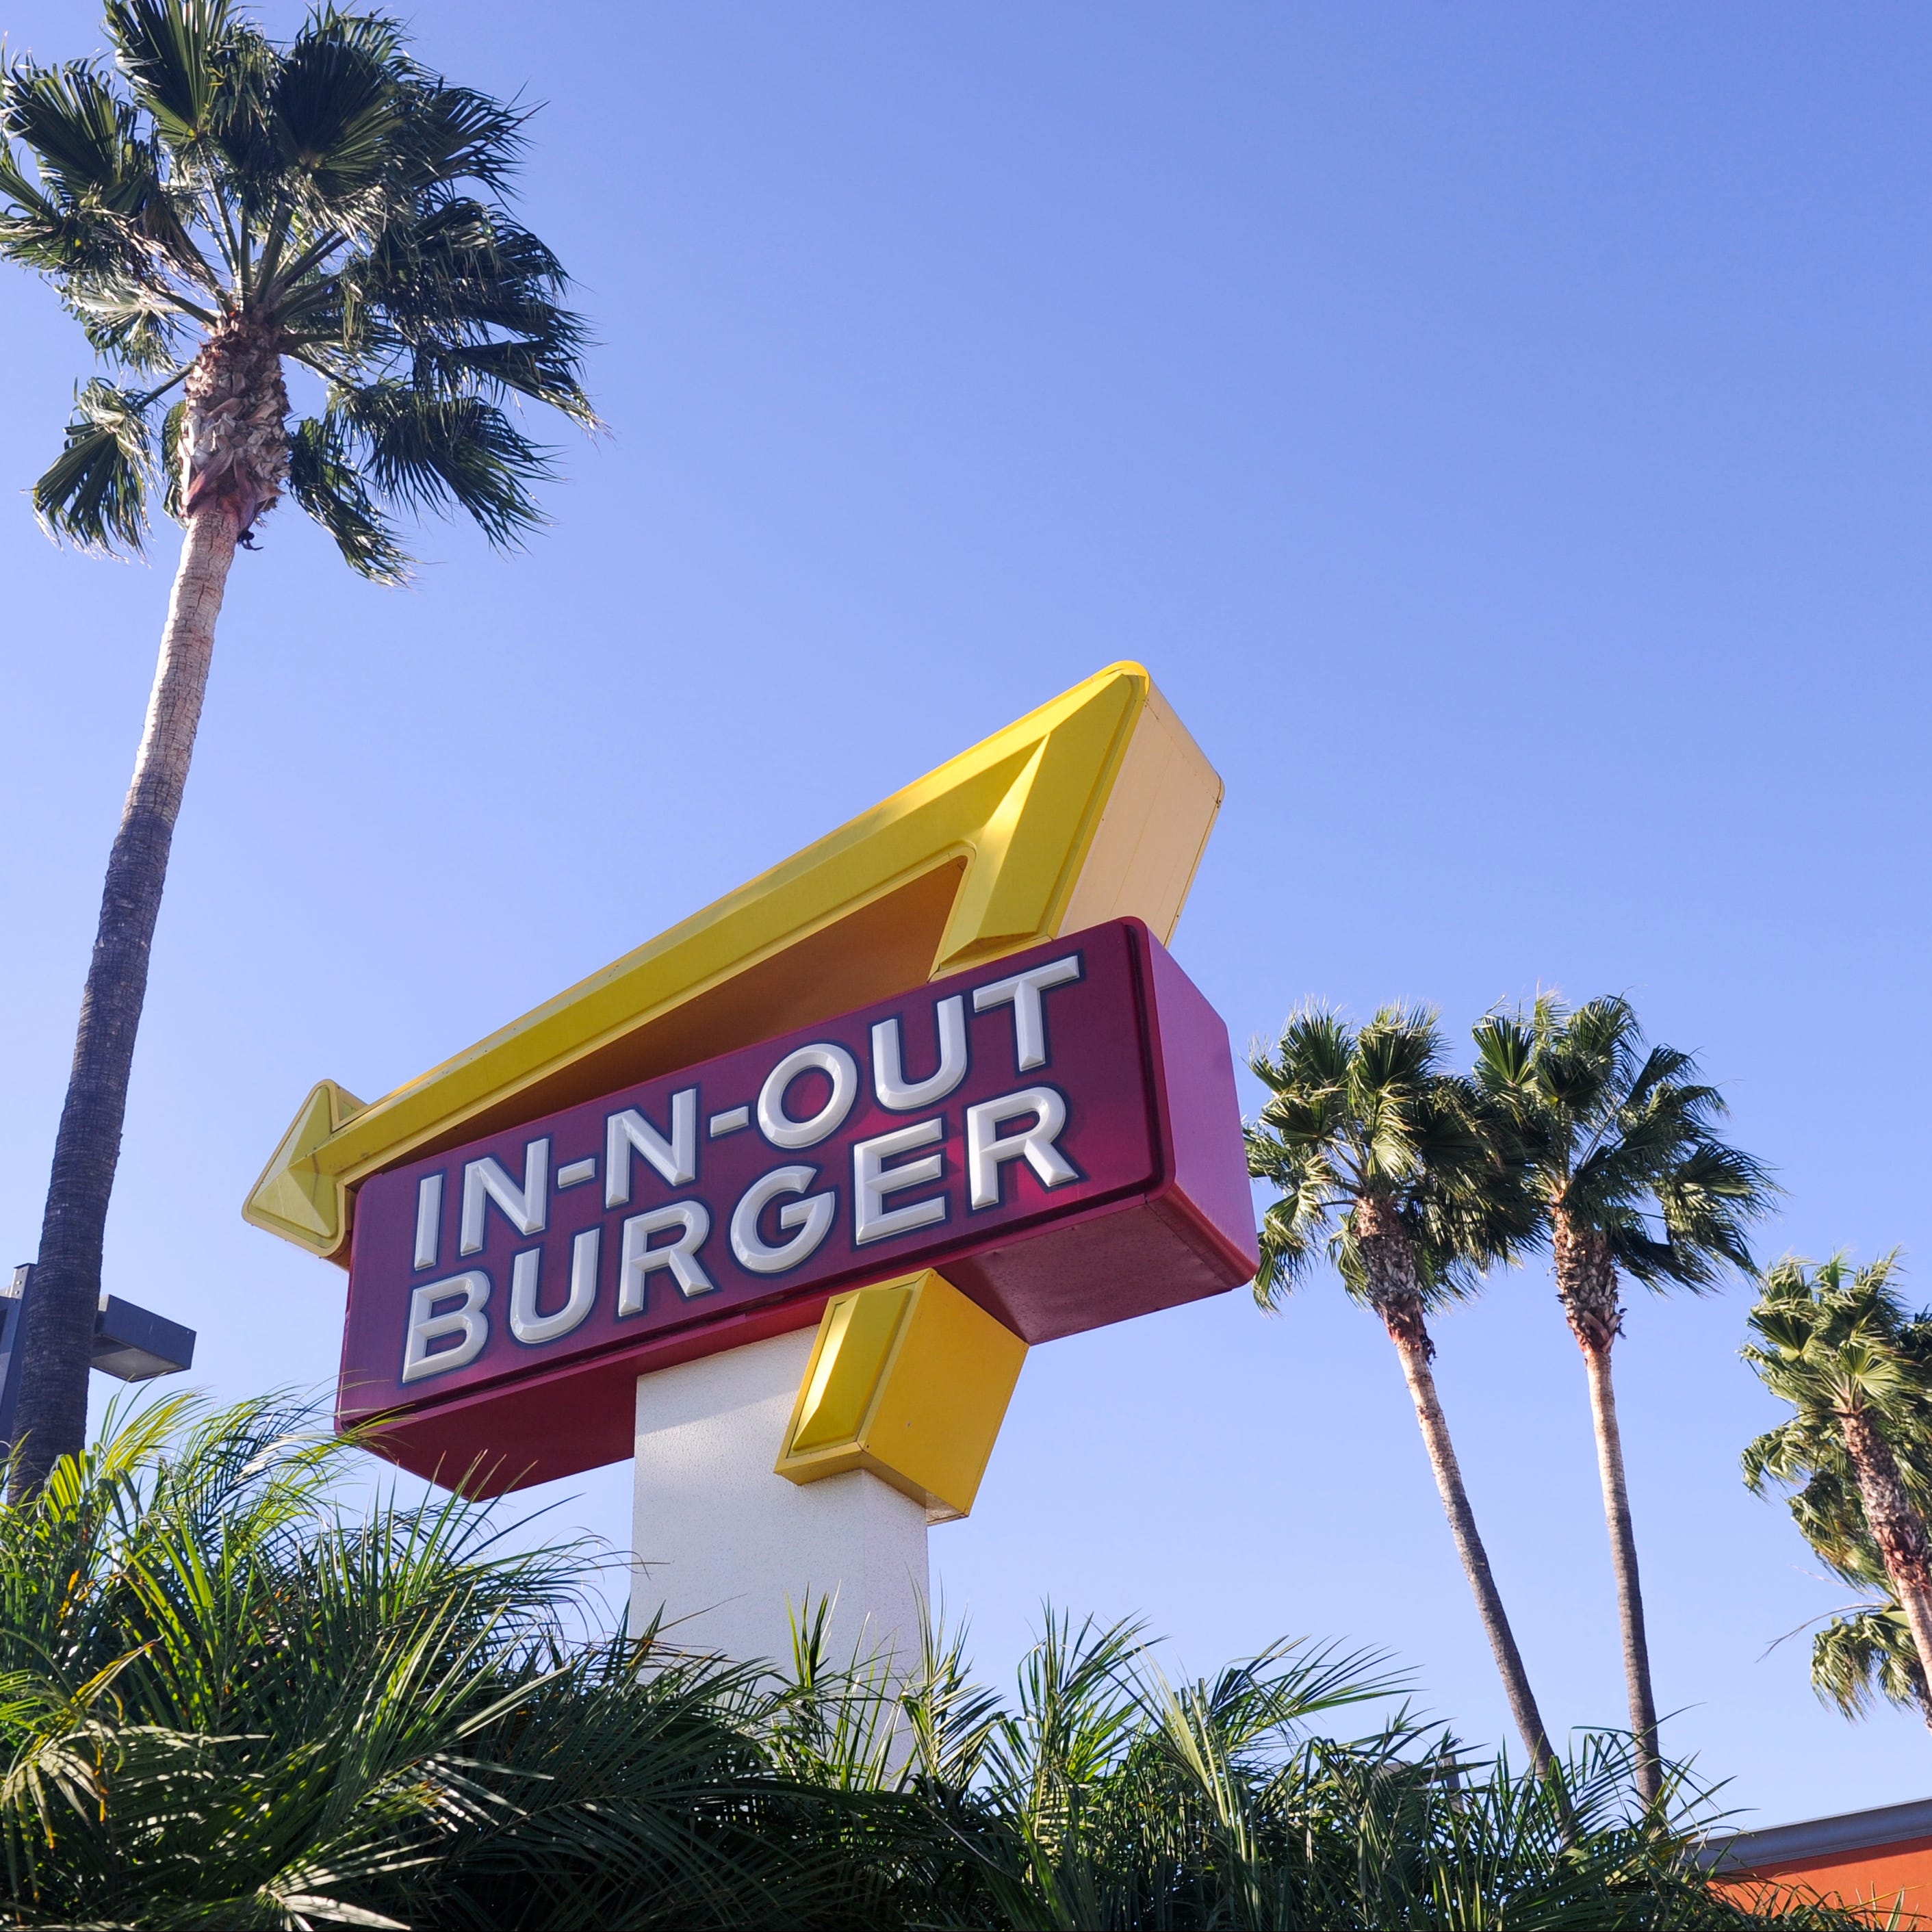 The In-N-Out Burger on Sepulveda Blvd and  Westchester Parkway in Los Angeles.